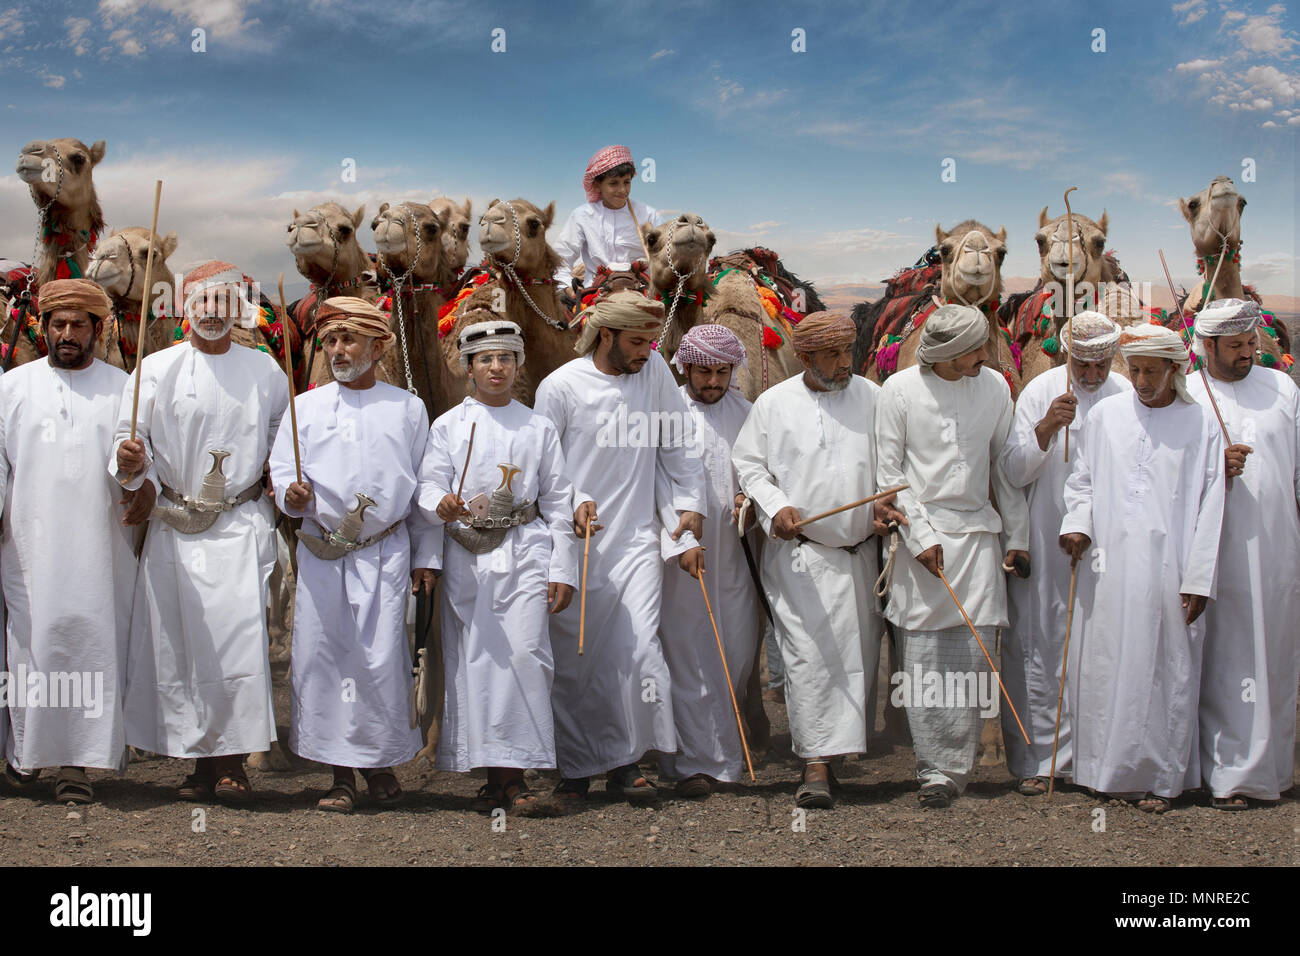 AL Safen, Oman, 27th April 2018: men with their camels walking in a countryside of Oman Stock Photo